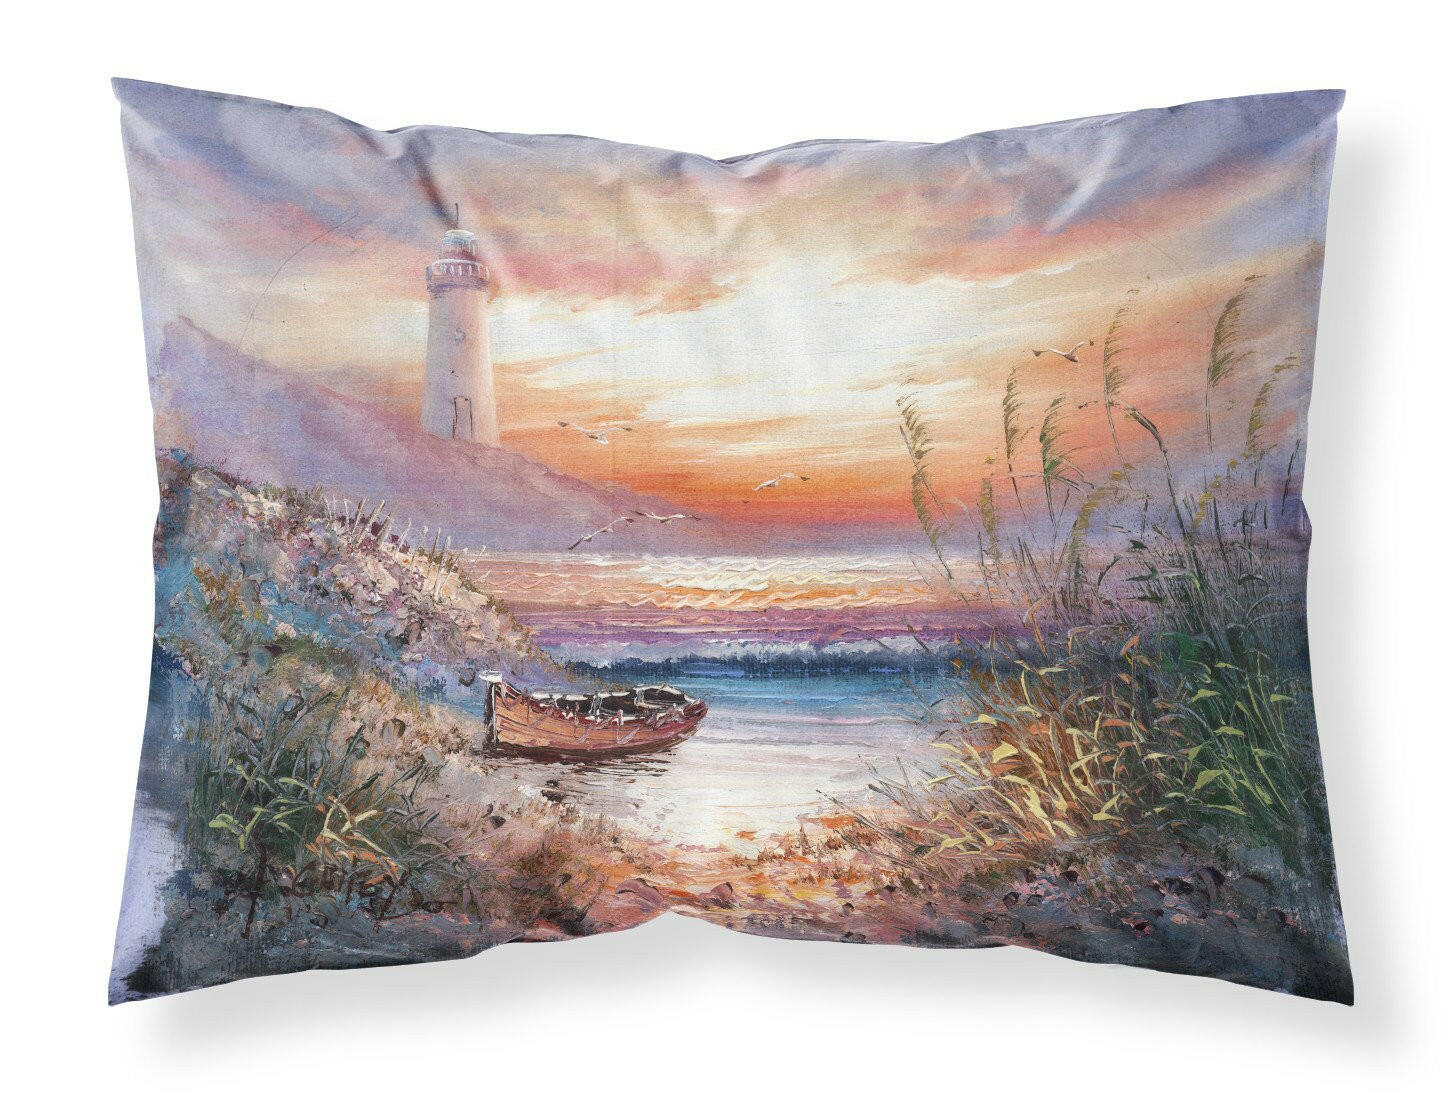 Lighthouse Scene with Boat Fabric Standard Pillowcase APH4130PILLOWCASE by Caroline's Treasures